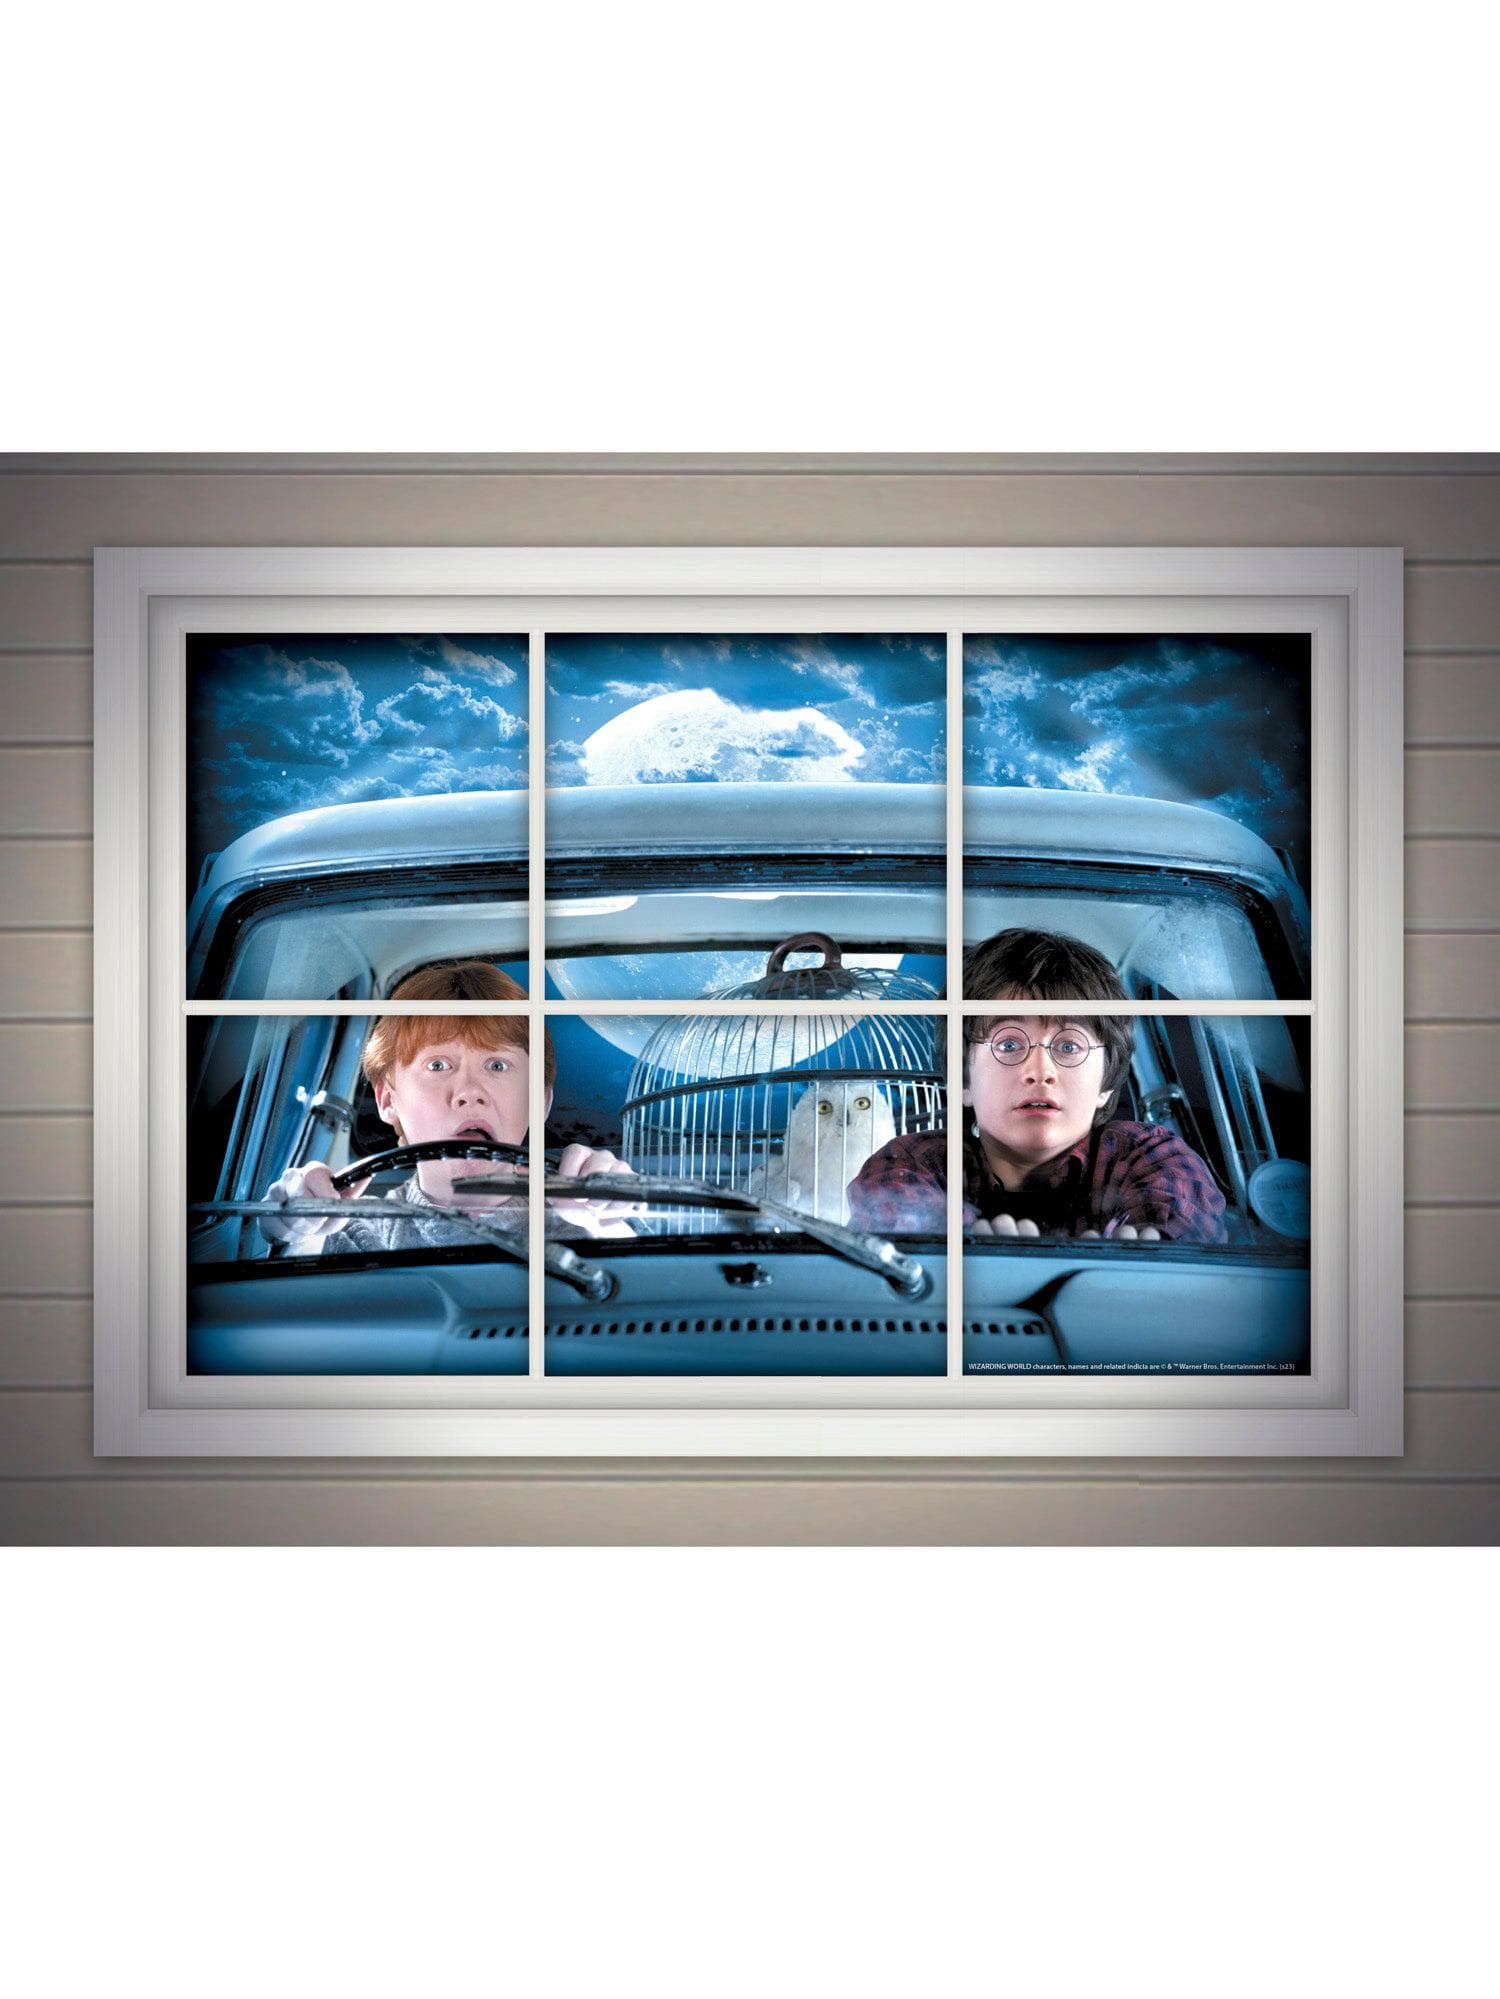 Harry Potter and Ron Weasley Window Cover Decoration - costumes.com